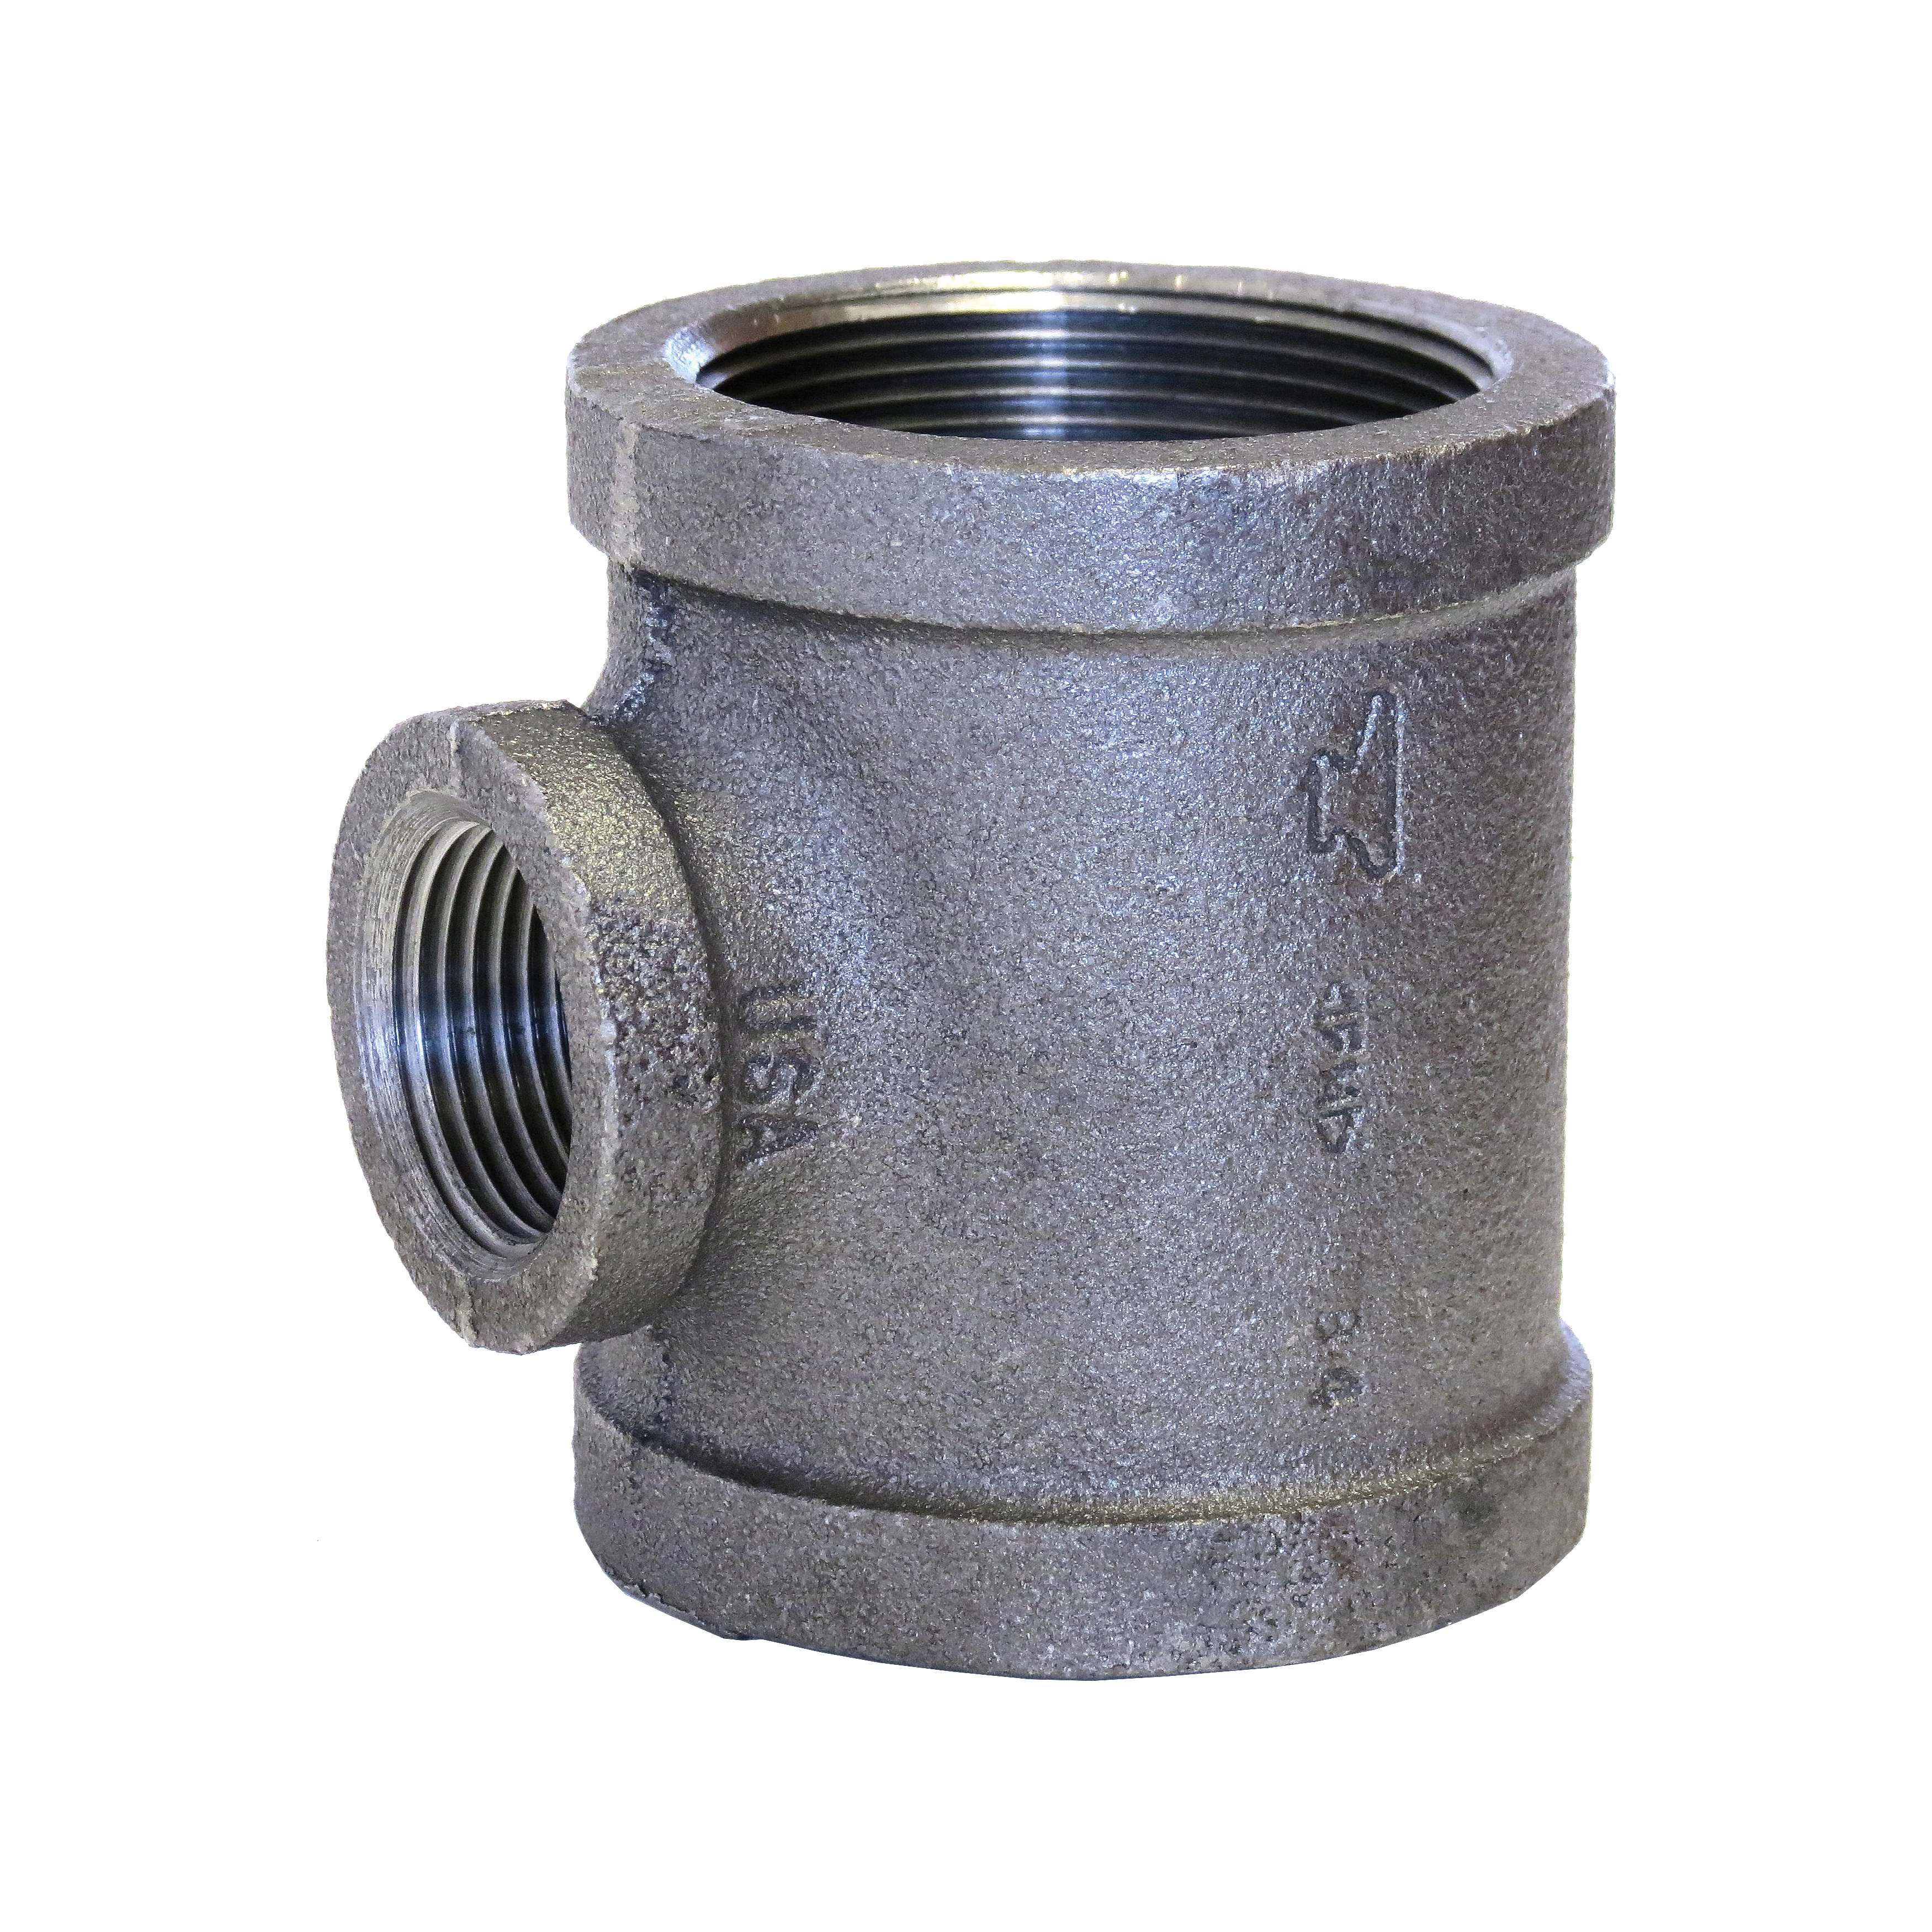 SPF/Anvil™ 0811052208 FIG 3105R Pipe Reducing Tee, 1 x 1 x 2 in Nominal, FNPT End Style, 150 lb, Malleable Iron, Galvanized, Import